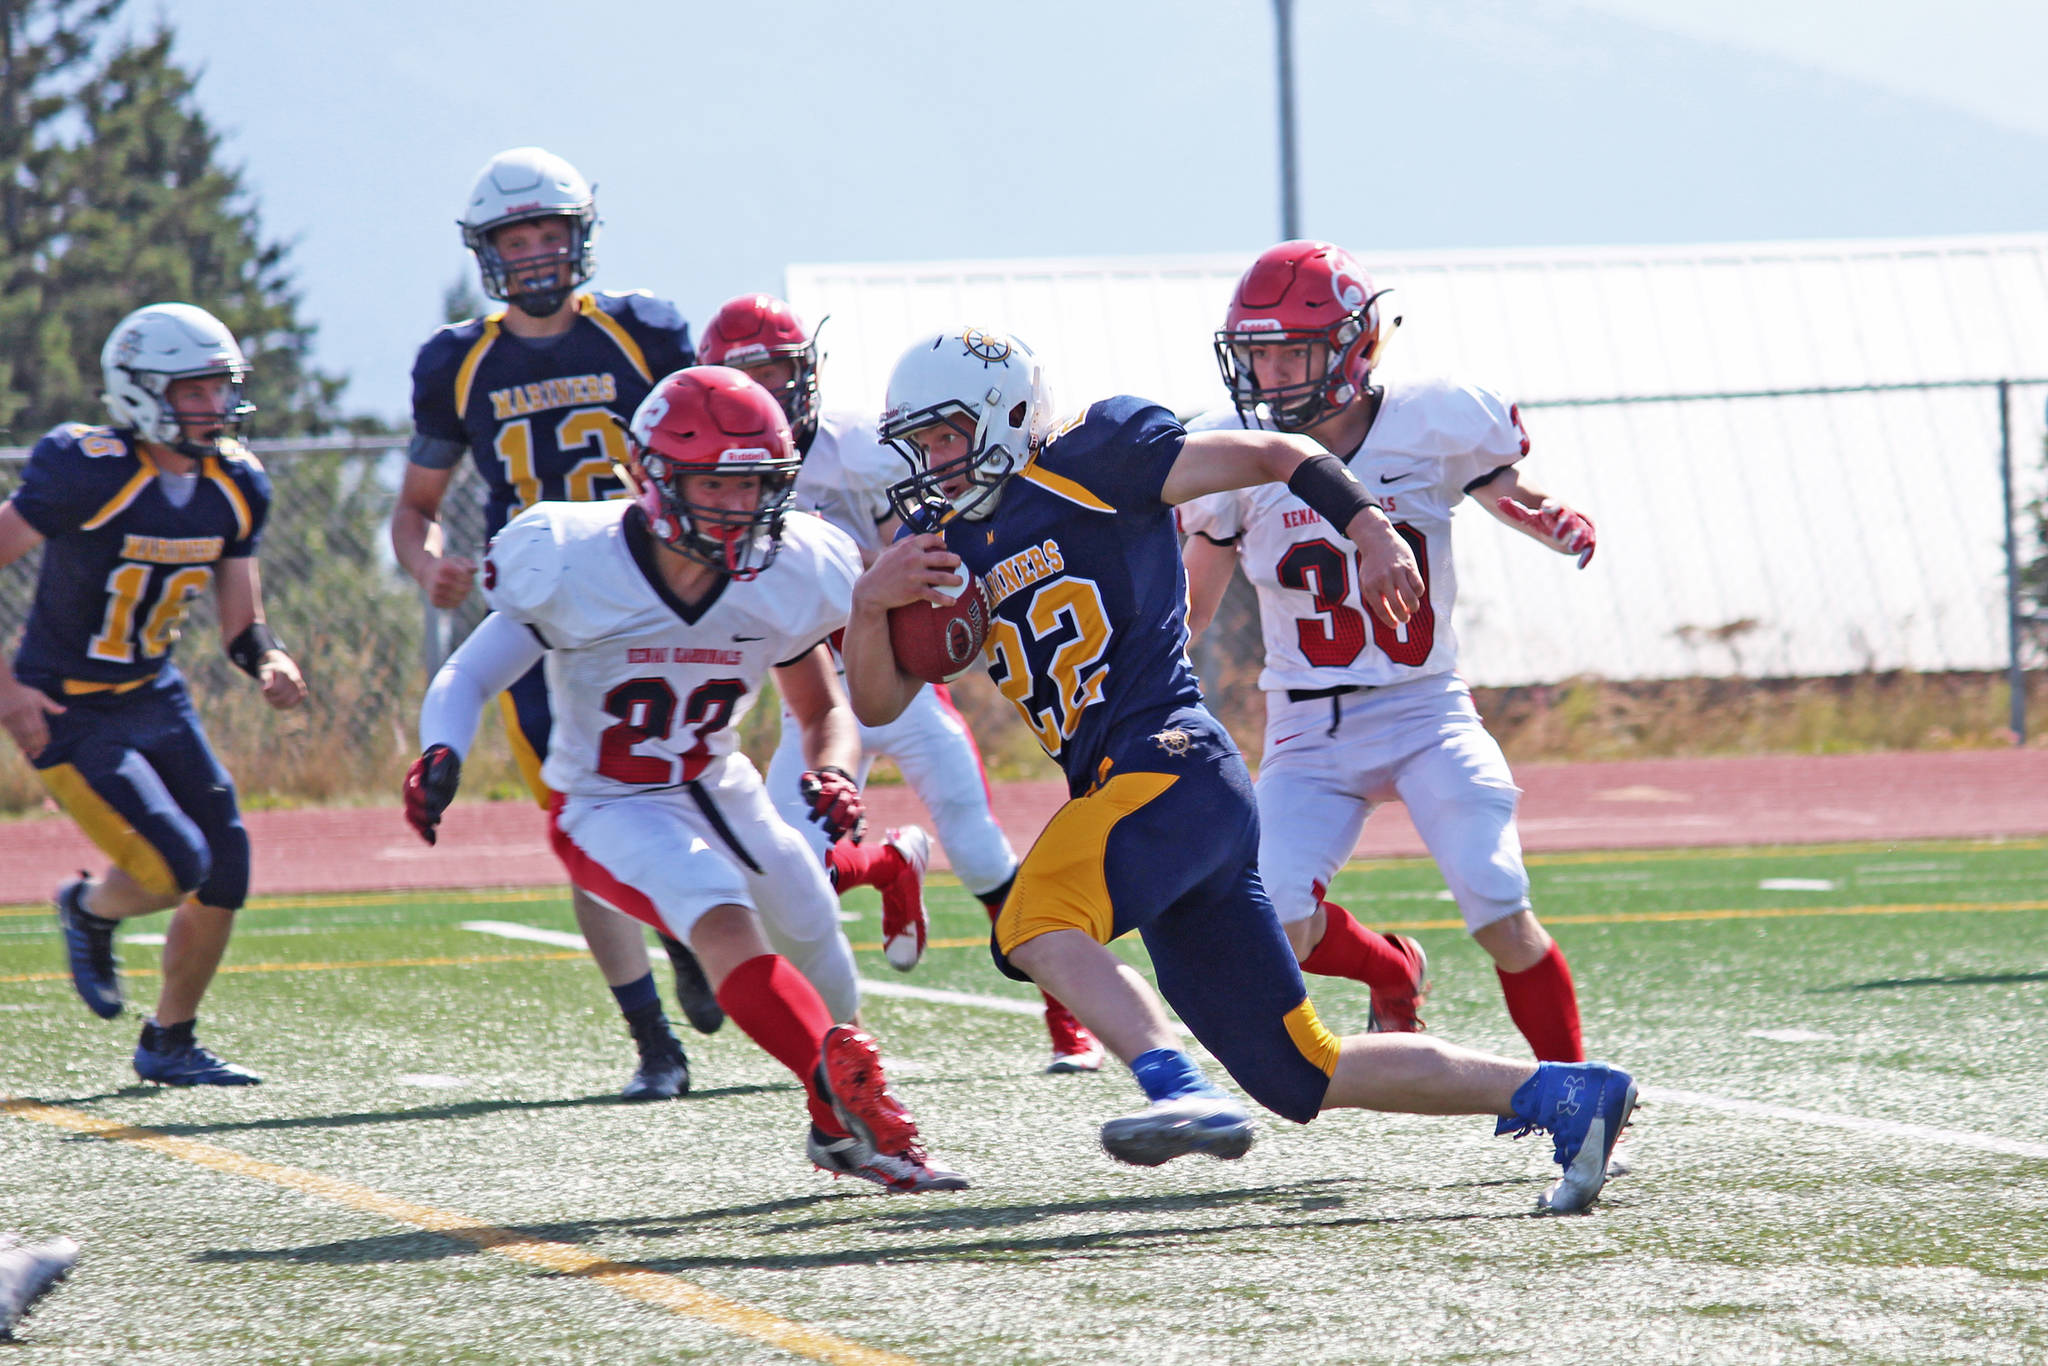 Kachemak-Selo senior and Homer runningback Antonin Maruchev looks for a place to go while under pressure from the Kenai Kardinals during a Saturday, Aug. 17, 2019 football game at Homer High School in Homer, Alaska. (Photo by Megan Pacer/Homer News)